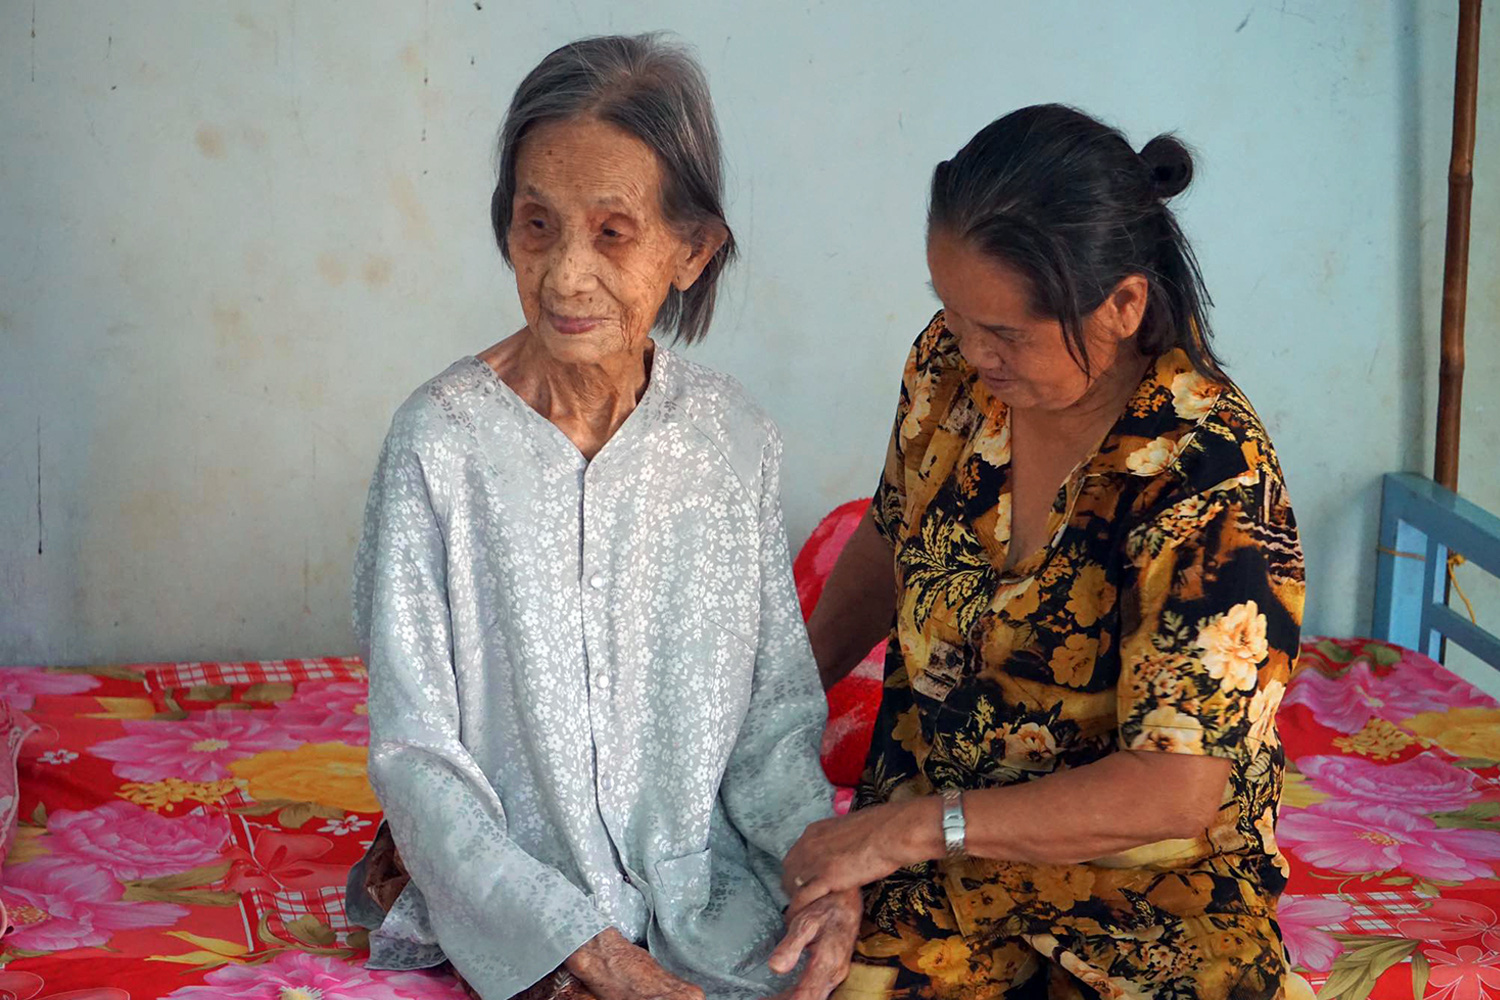 Trinh Thi Khong (L) and her 81-year-old daughter Do Thi Minh (R) in Dong Nai Province, southern Vietnam. Photo: Binh An / Tuoi Tre